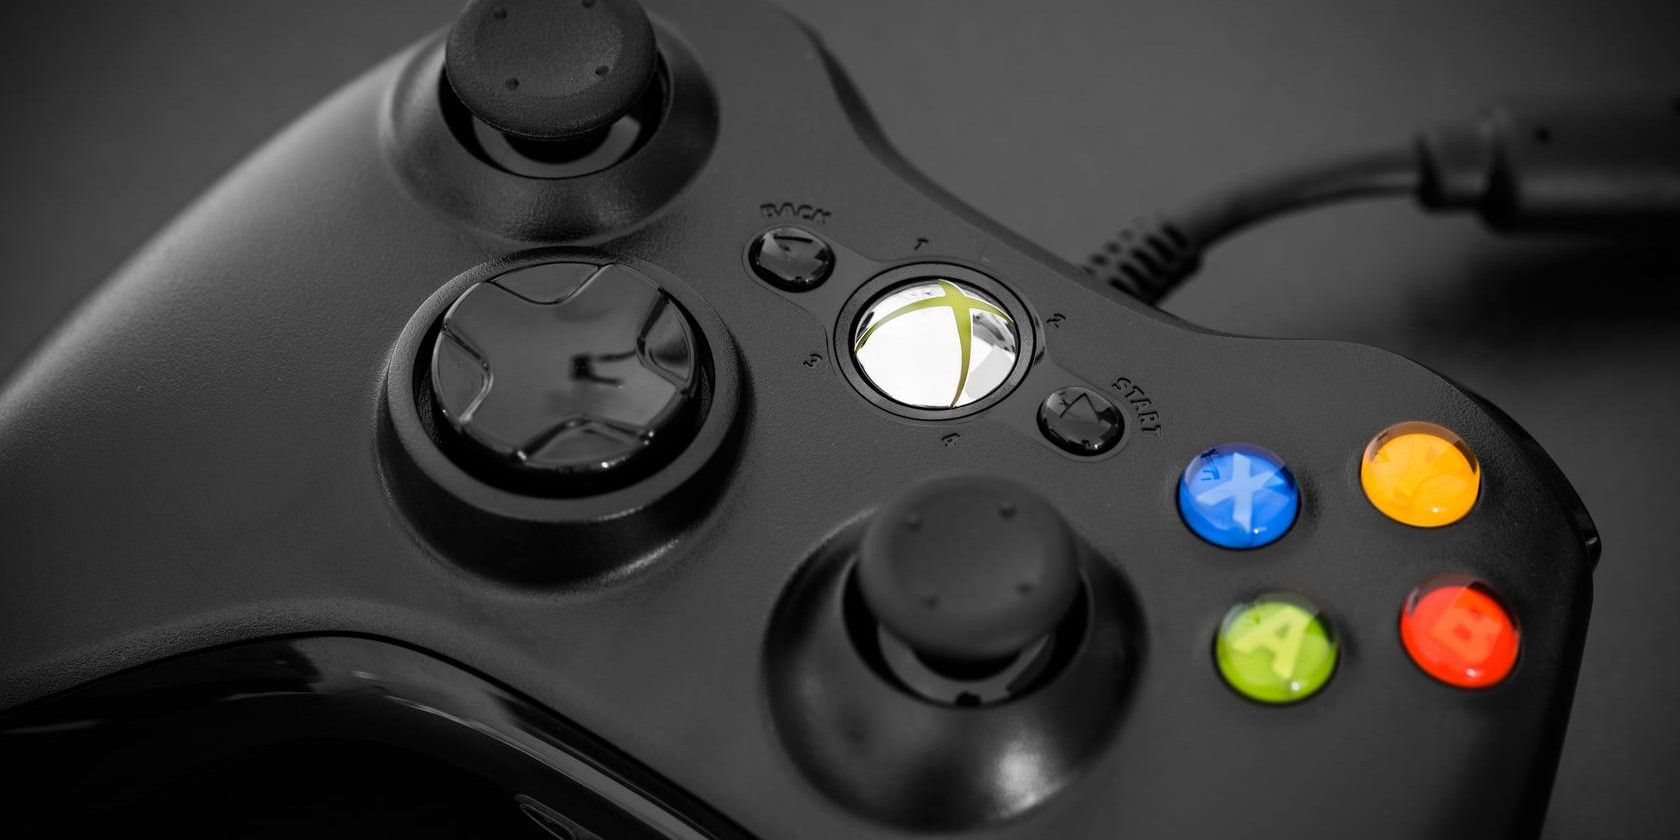 can xbox 360 controller be used as game controller for pc and mac games?